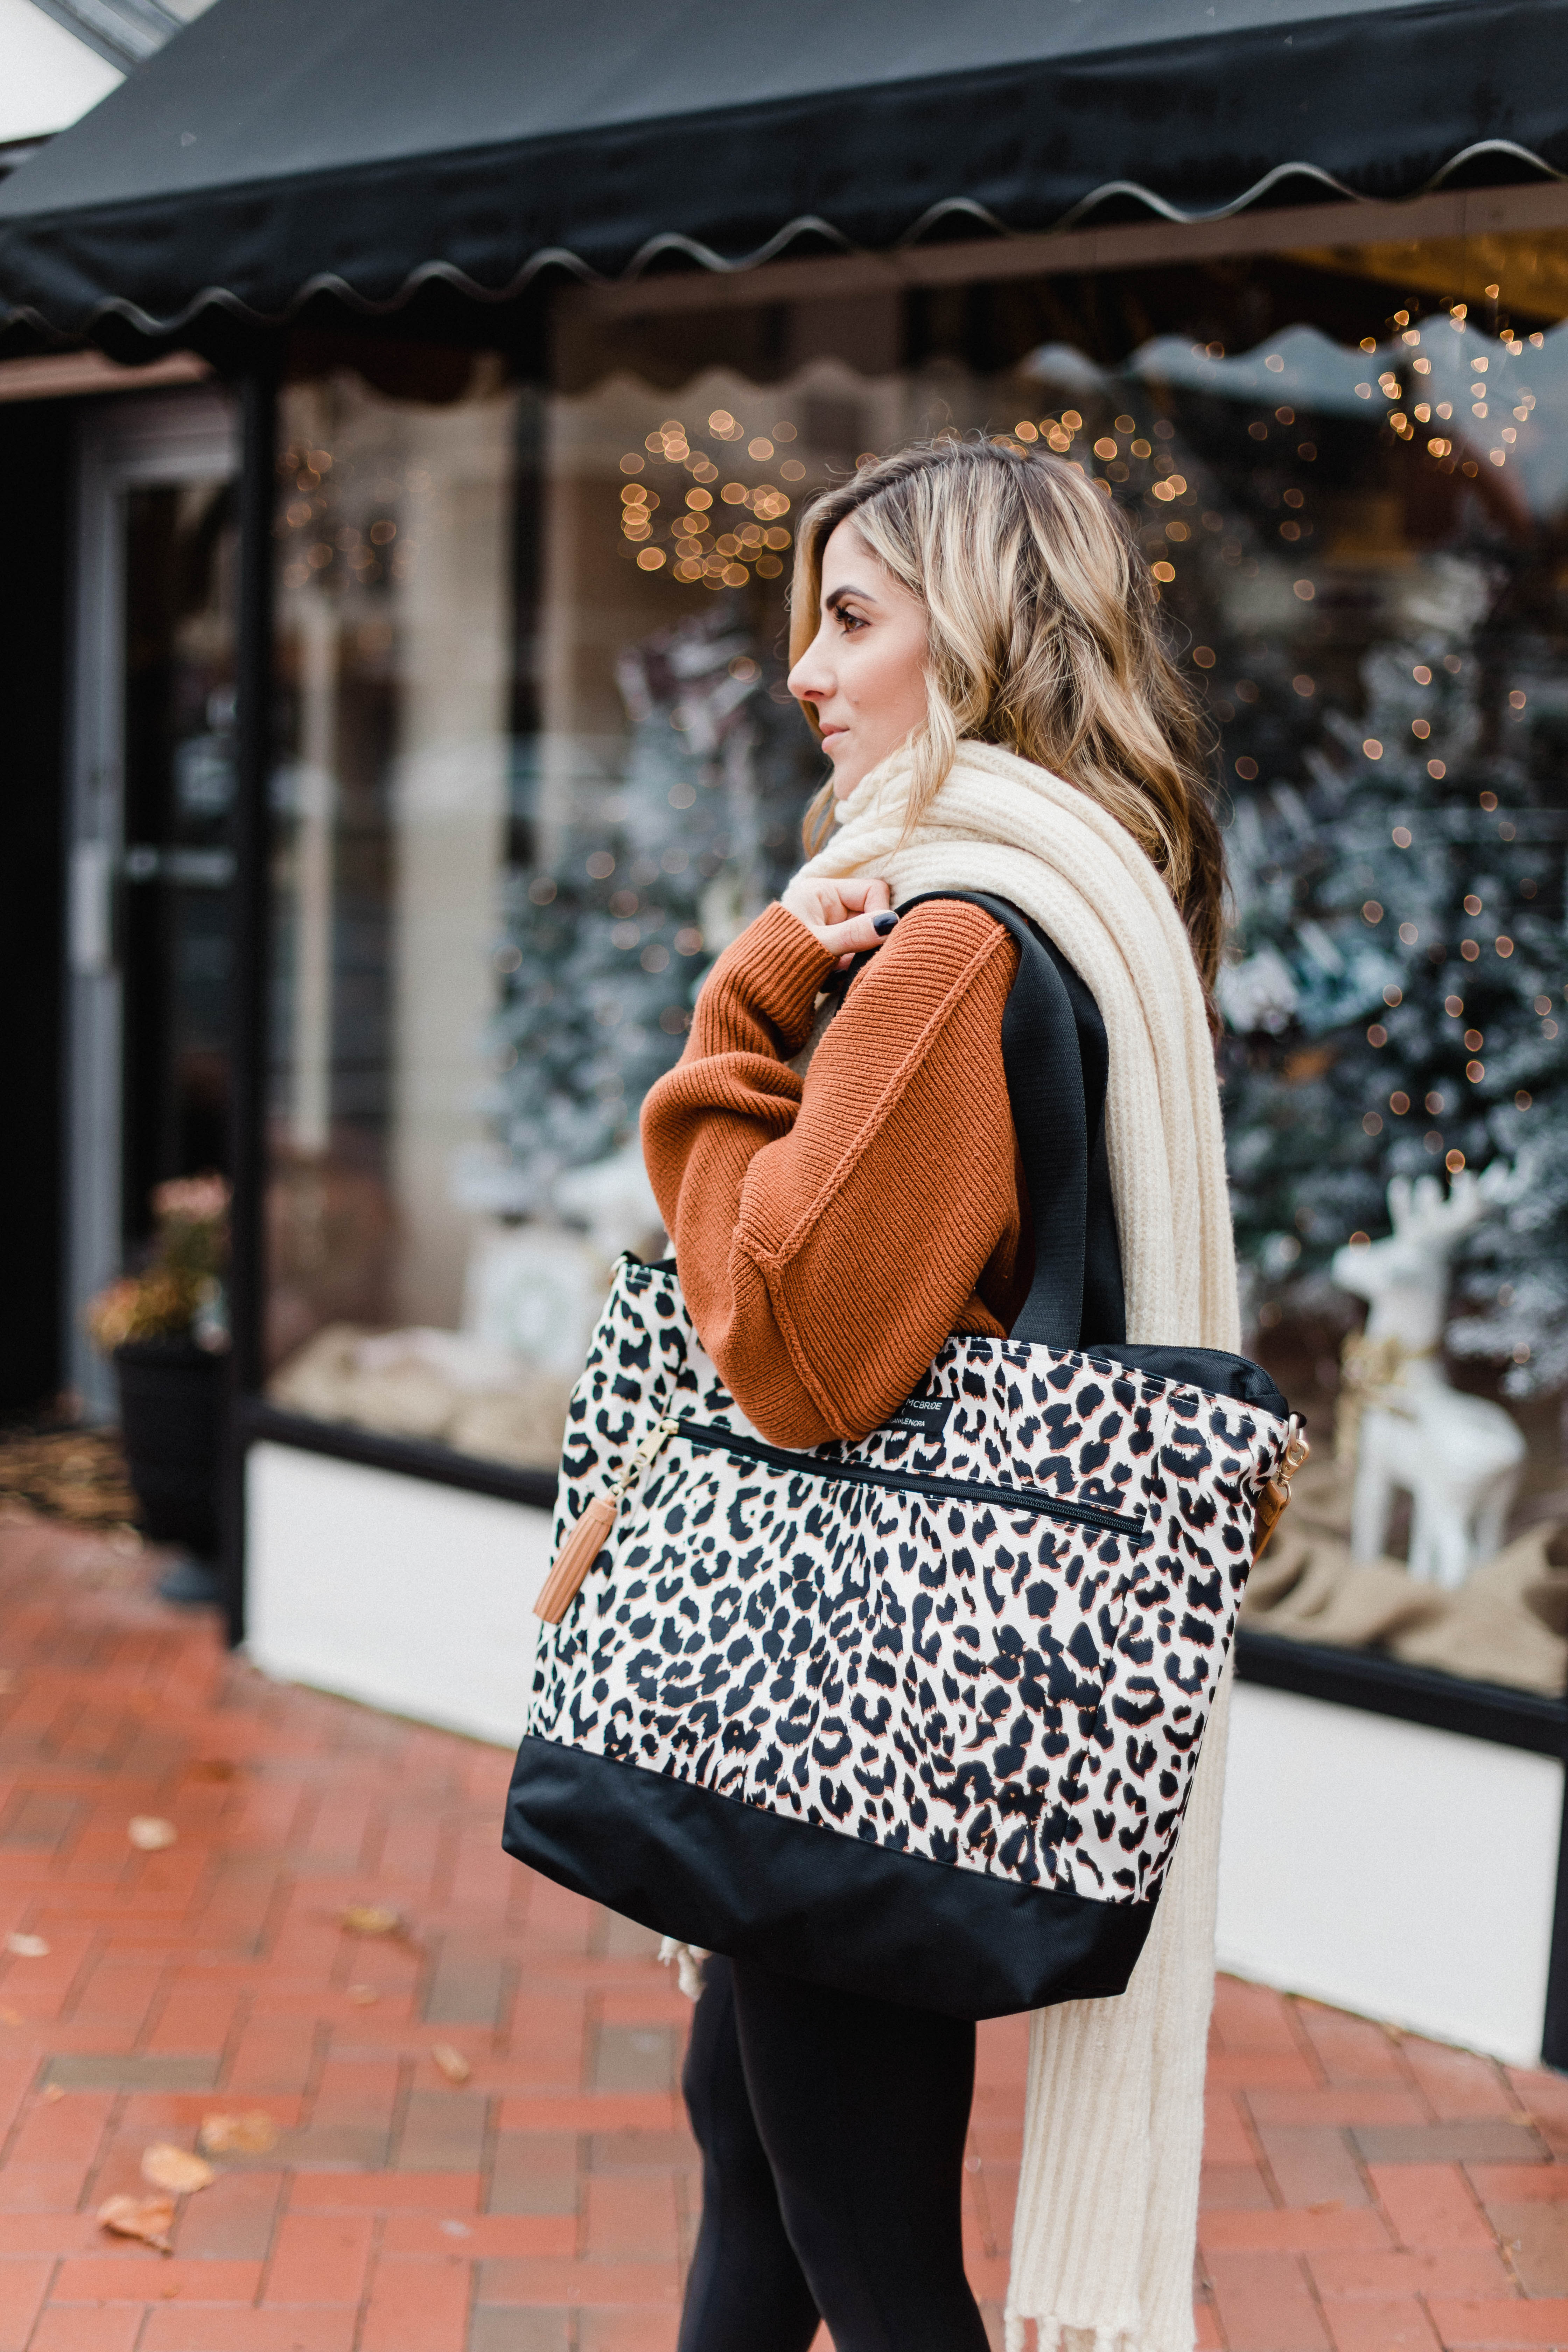 Connecticut life and style blogger Lauren McBride shares her Lauren McBride x Logan and Lenora collection launch, featuring a leopard print waterproof and stain resistant travel bag.